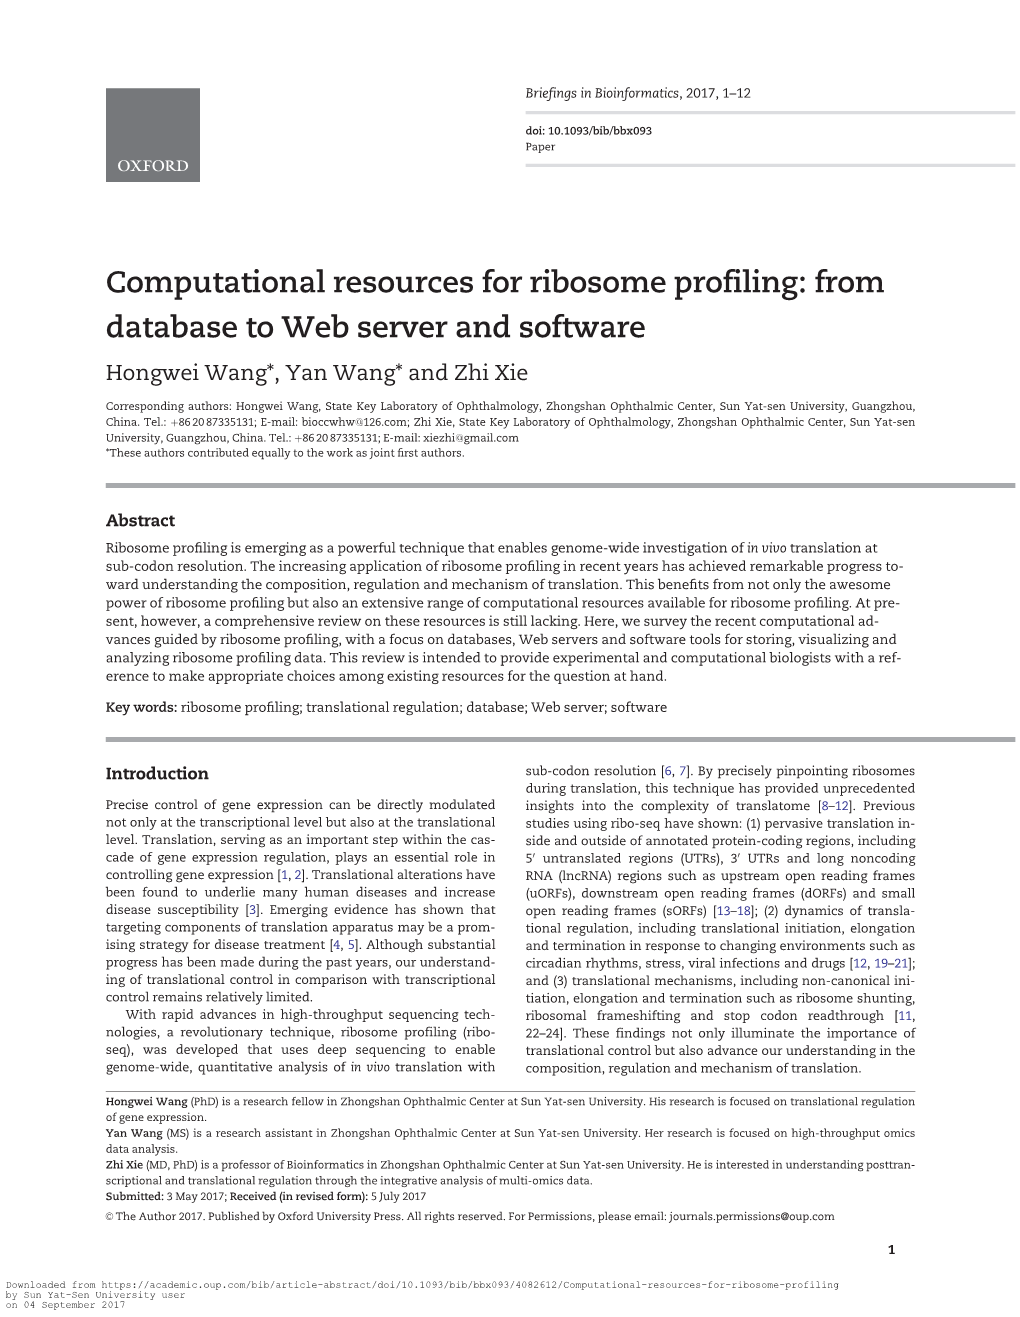 Computational Resources for Ribosome Profiling: from Database to Web Server and Software Hongwei Wang*, Yan Wang* and Zhi Xie